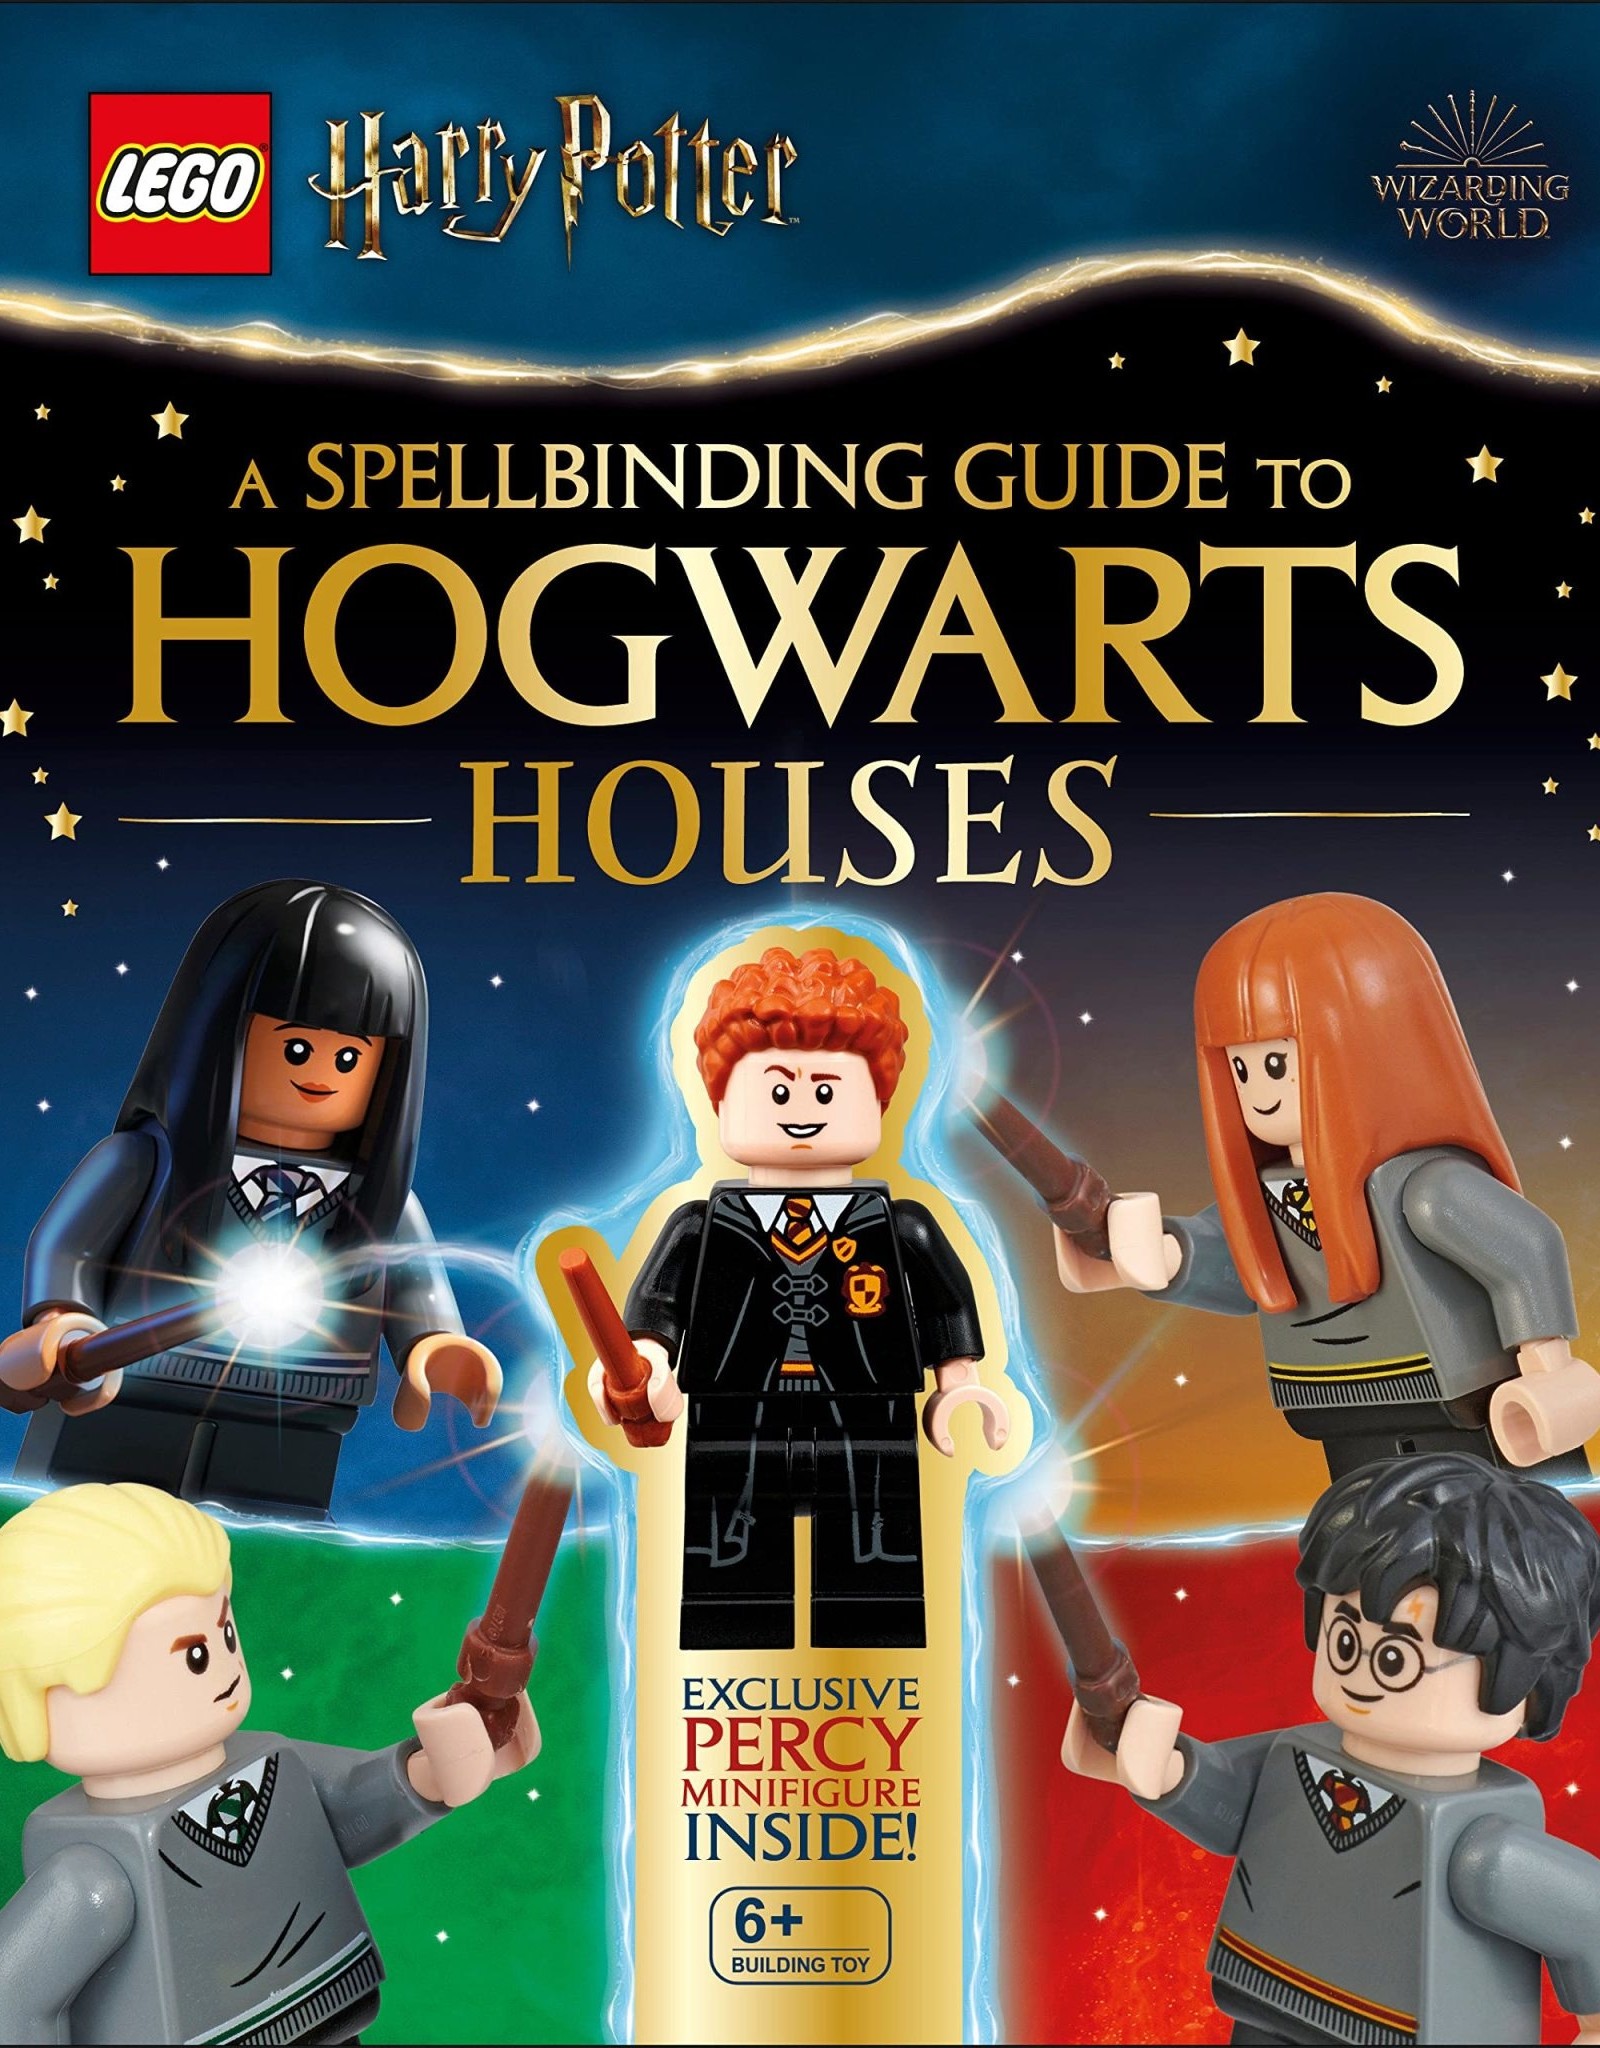 LEGO Classic Lego A Spellbinding Guide to Hogwarts Houses (Exclusive Percy figure inside!)